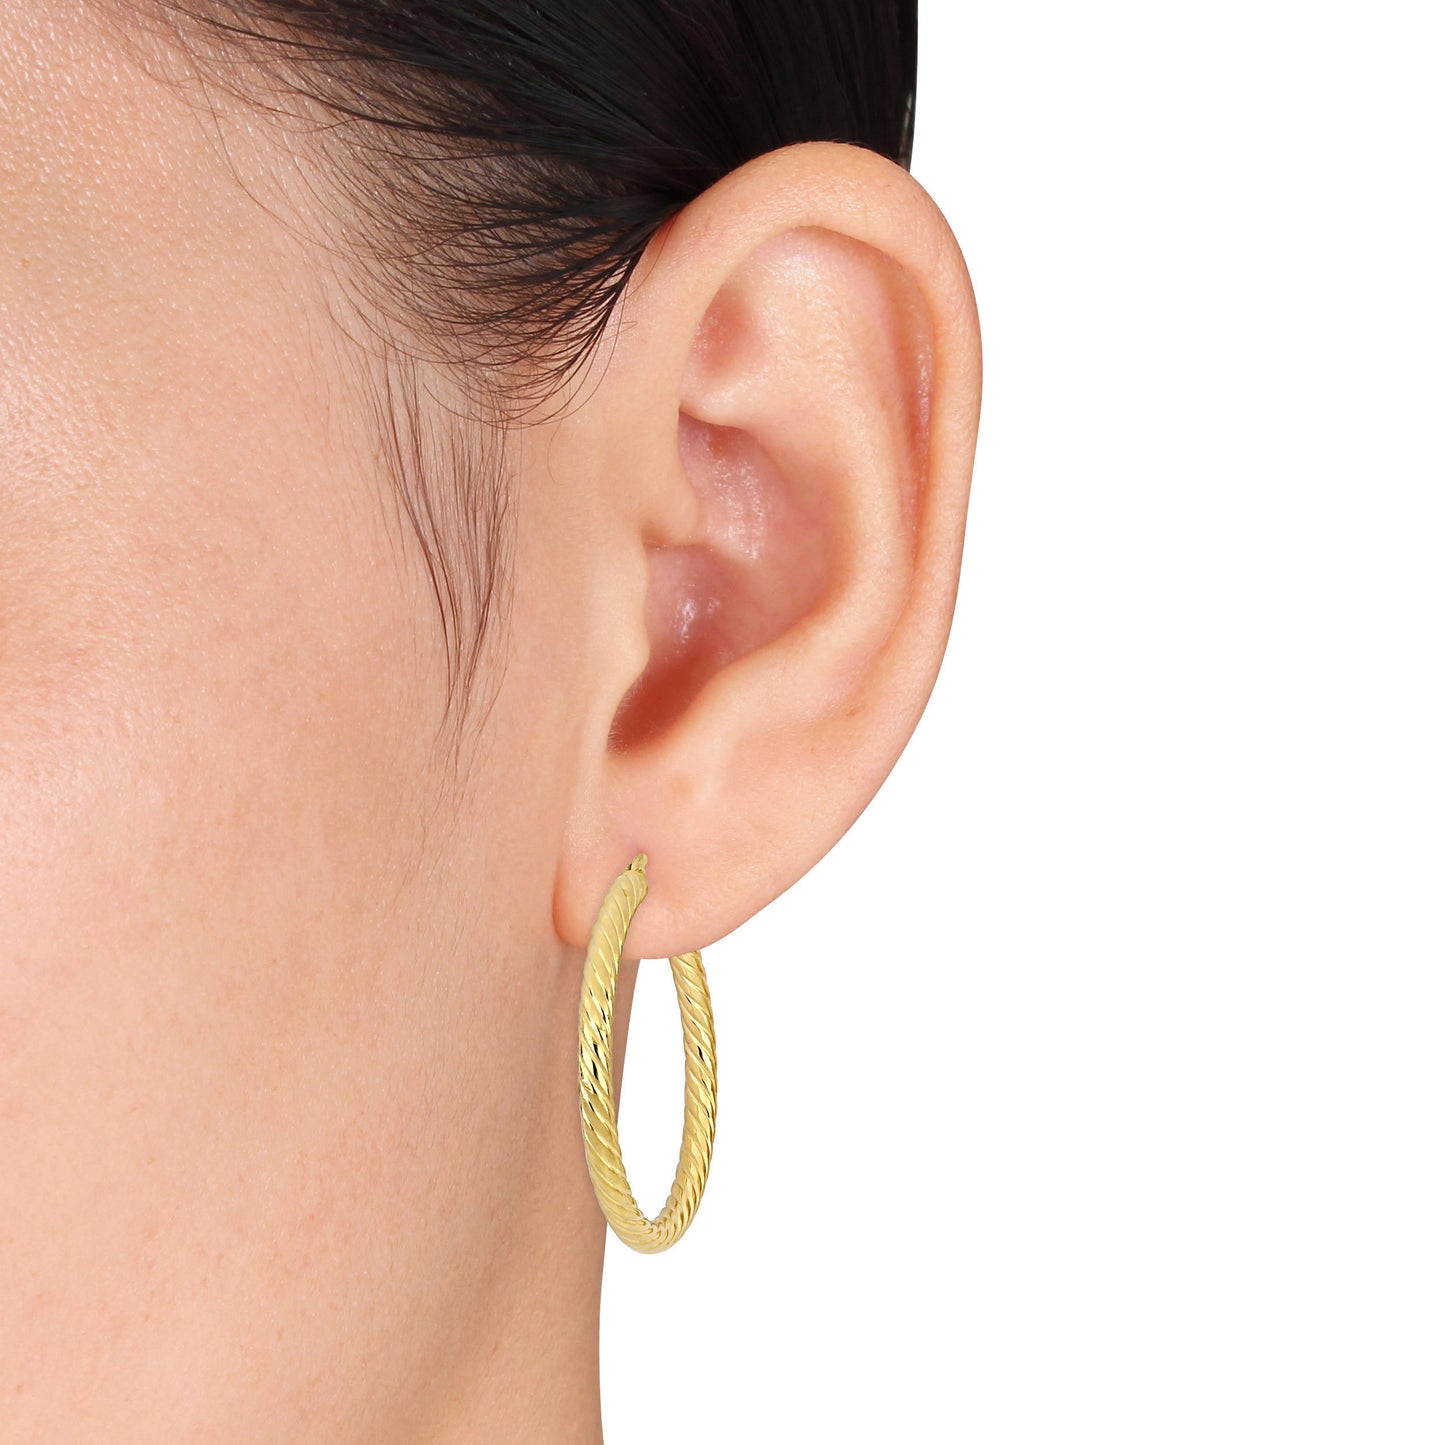 Twisted Large Hoops in 14k Yellow Gold